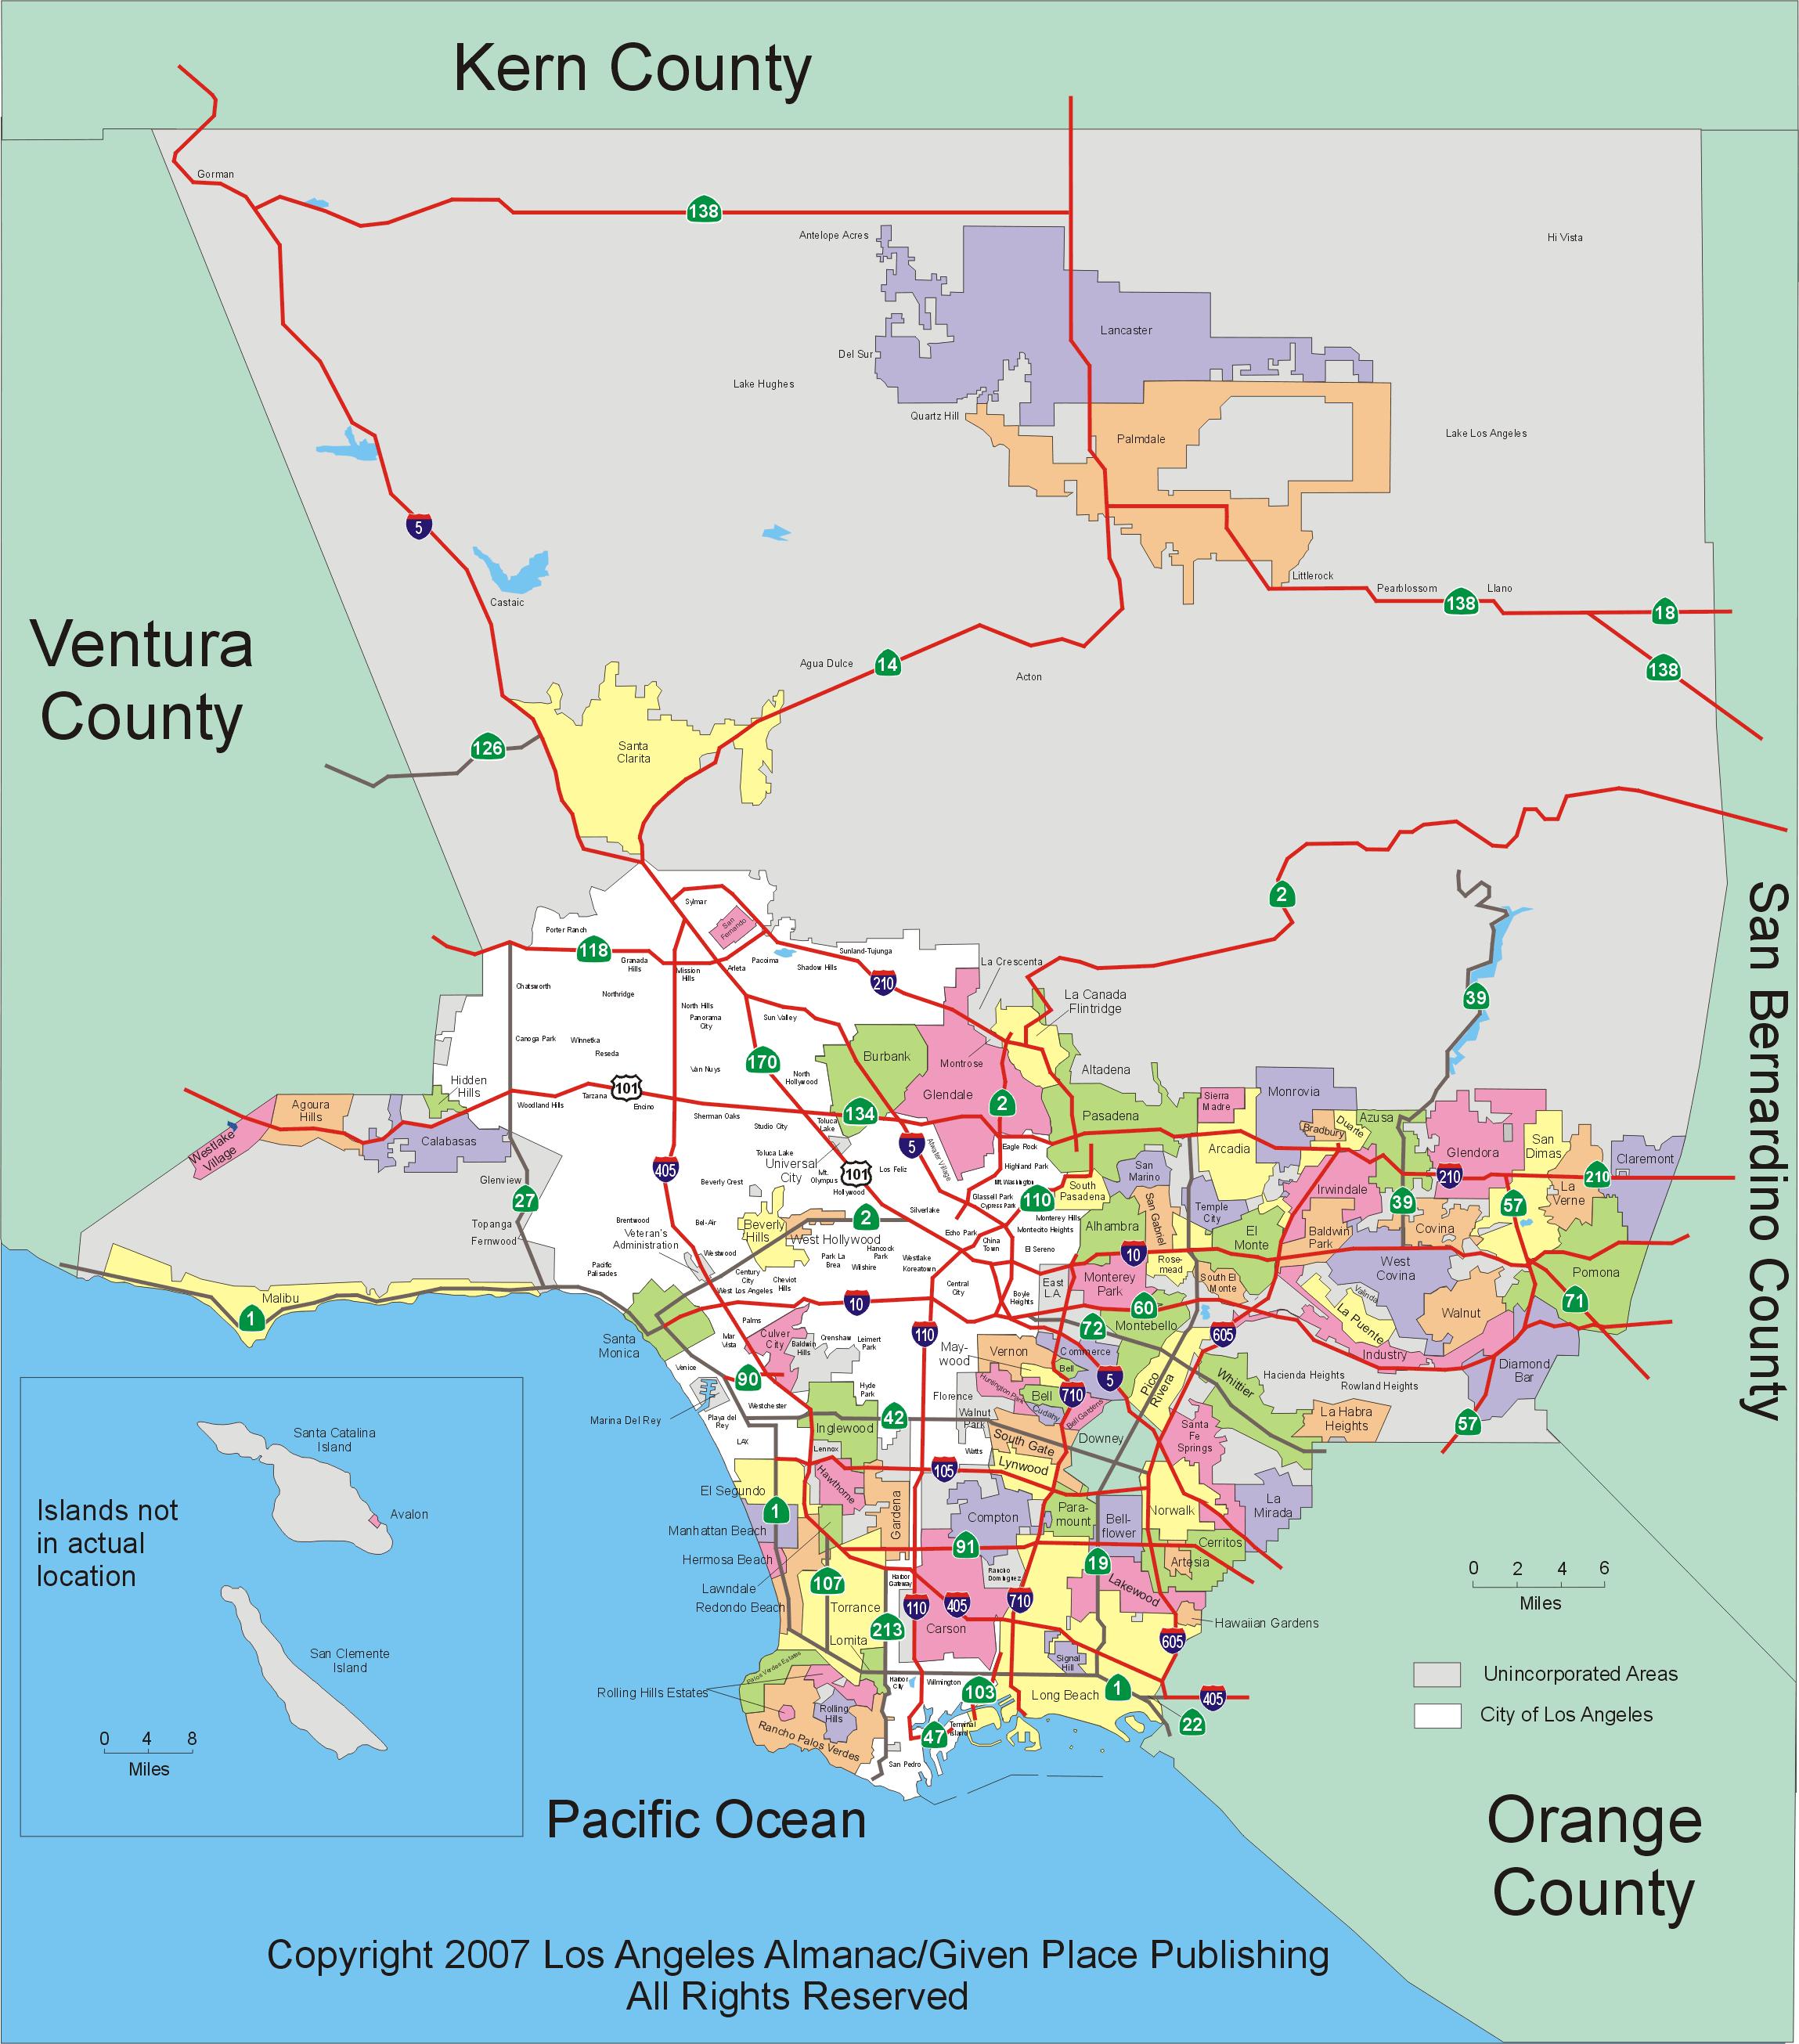 LA county zoning map Los Angeles county zoning map (California USA)